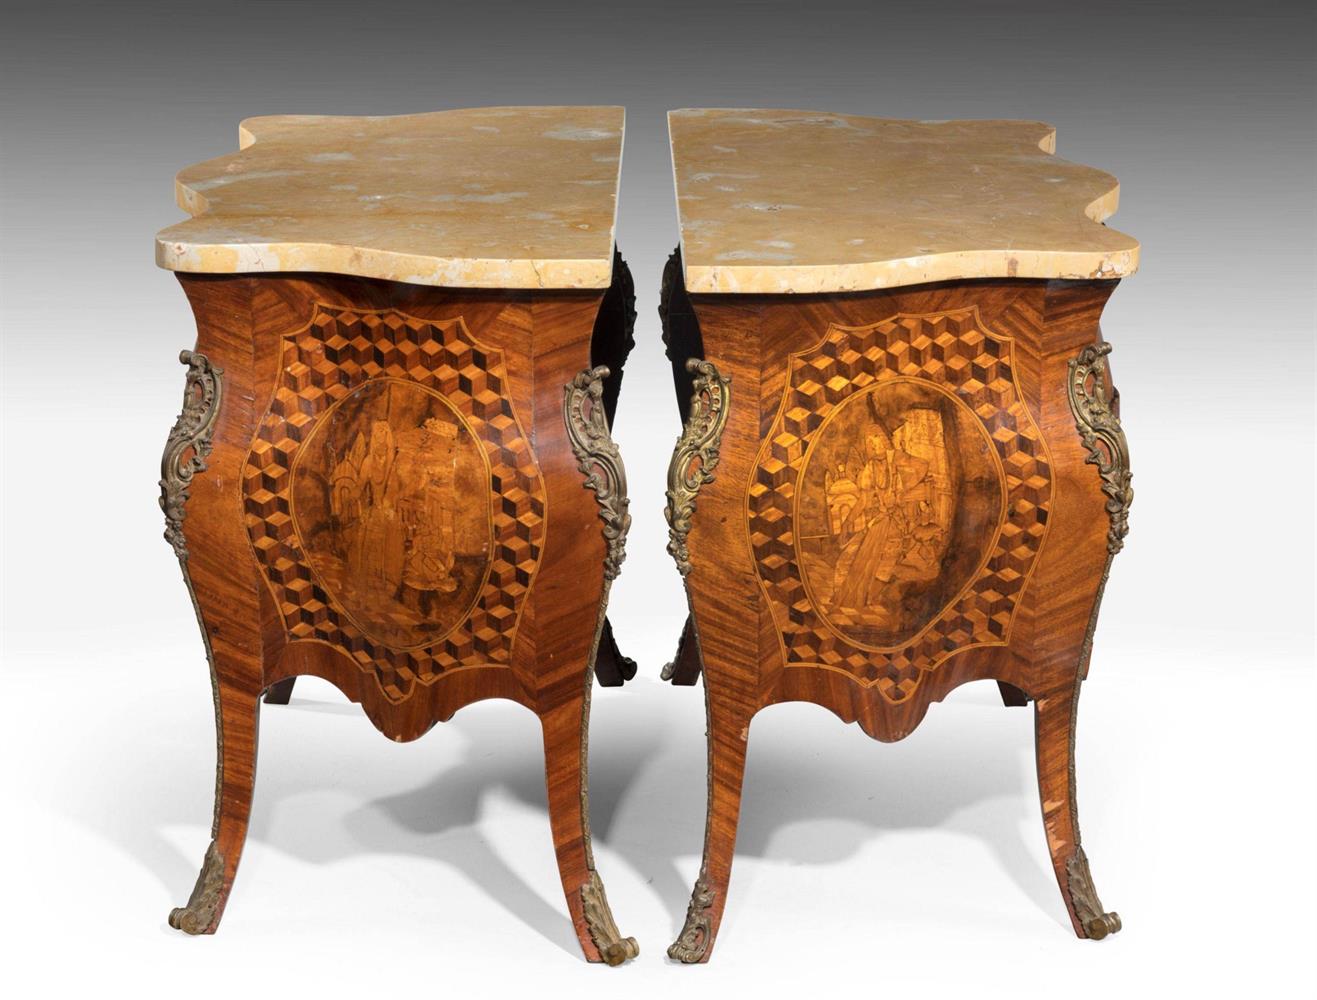 A PAIR OF GERMAN SMALL GILT METAL MOUNTED MARQUETRY AND PARQUETRY SERPENTINE COMMODES, 20TH CENTURY - Image 3 of 4